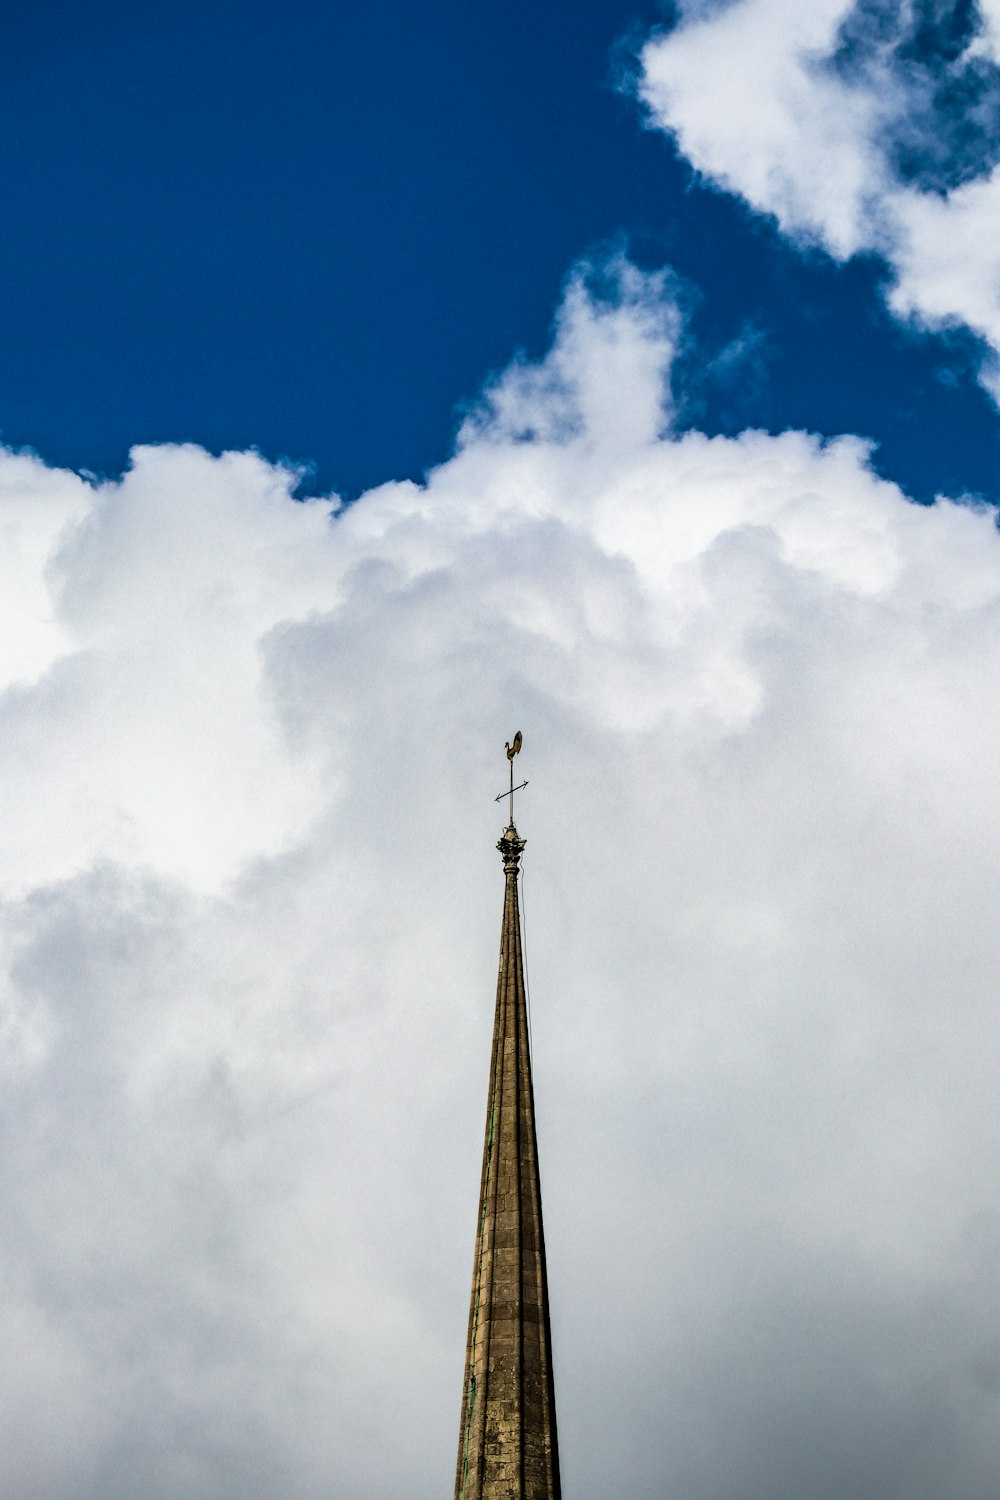 brown tower under blue sky and white clouds during daytime